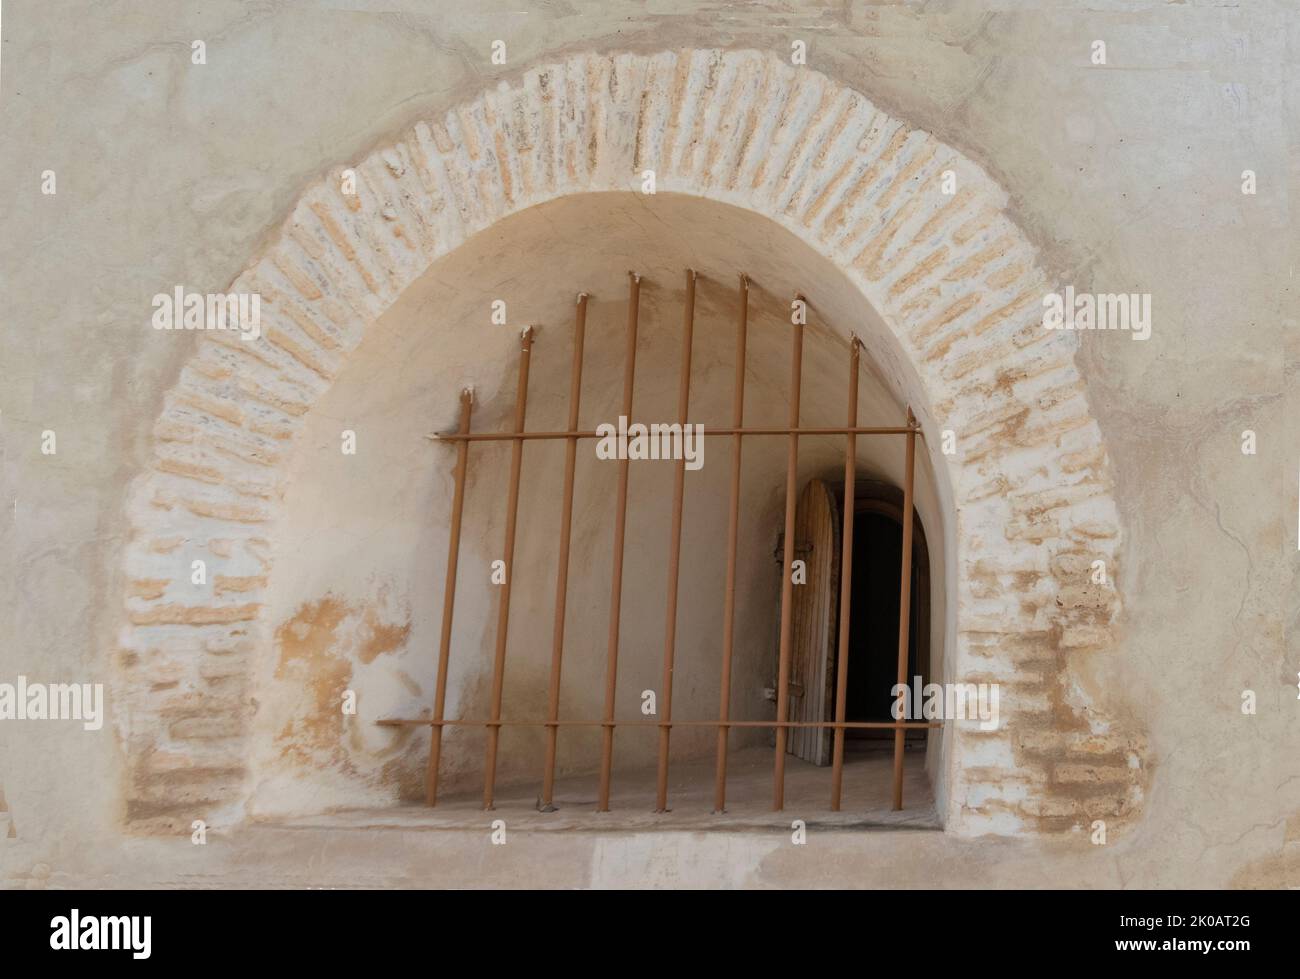 Curved window of pale stone in a wall in Morocco with iron bars painted white Stock Photo